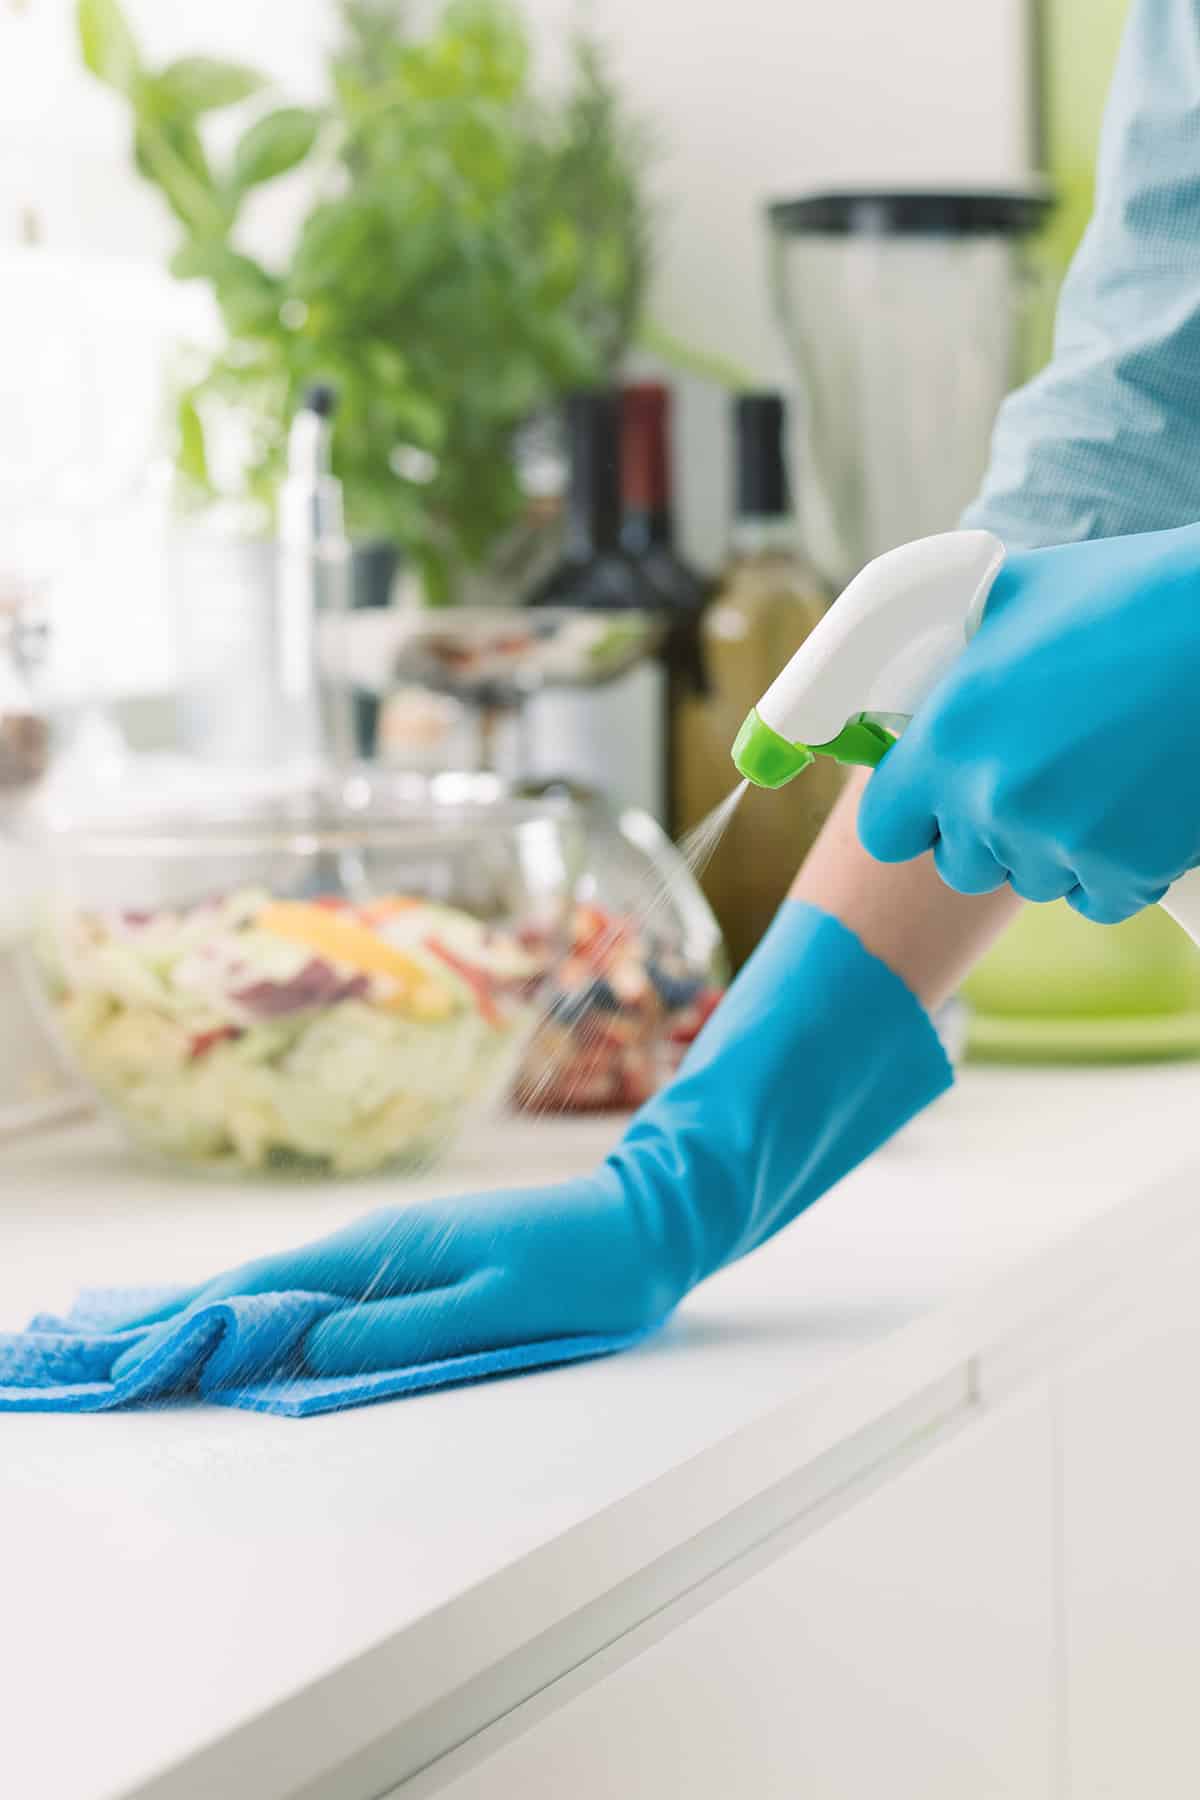 Woman cleaning countertop with gloves on using a spray bottle and sponge.